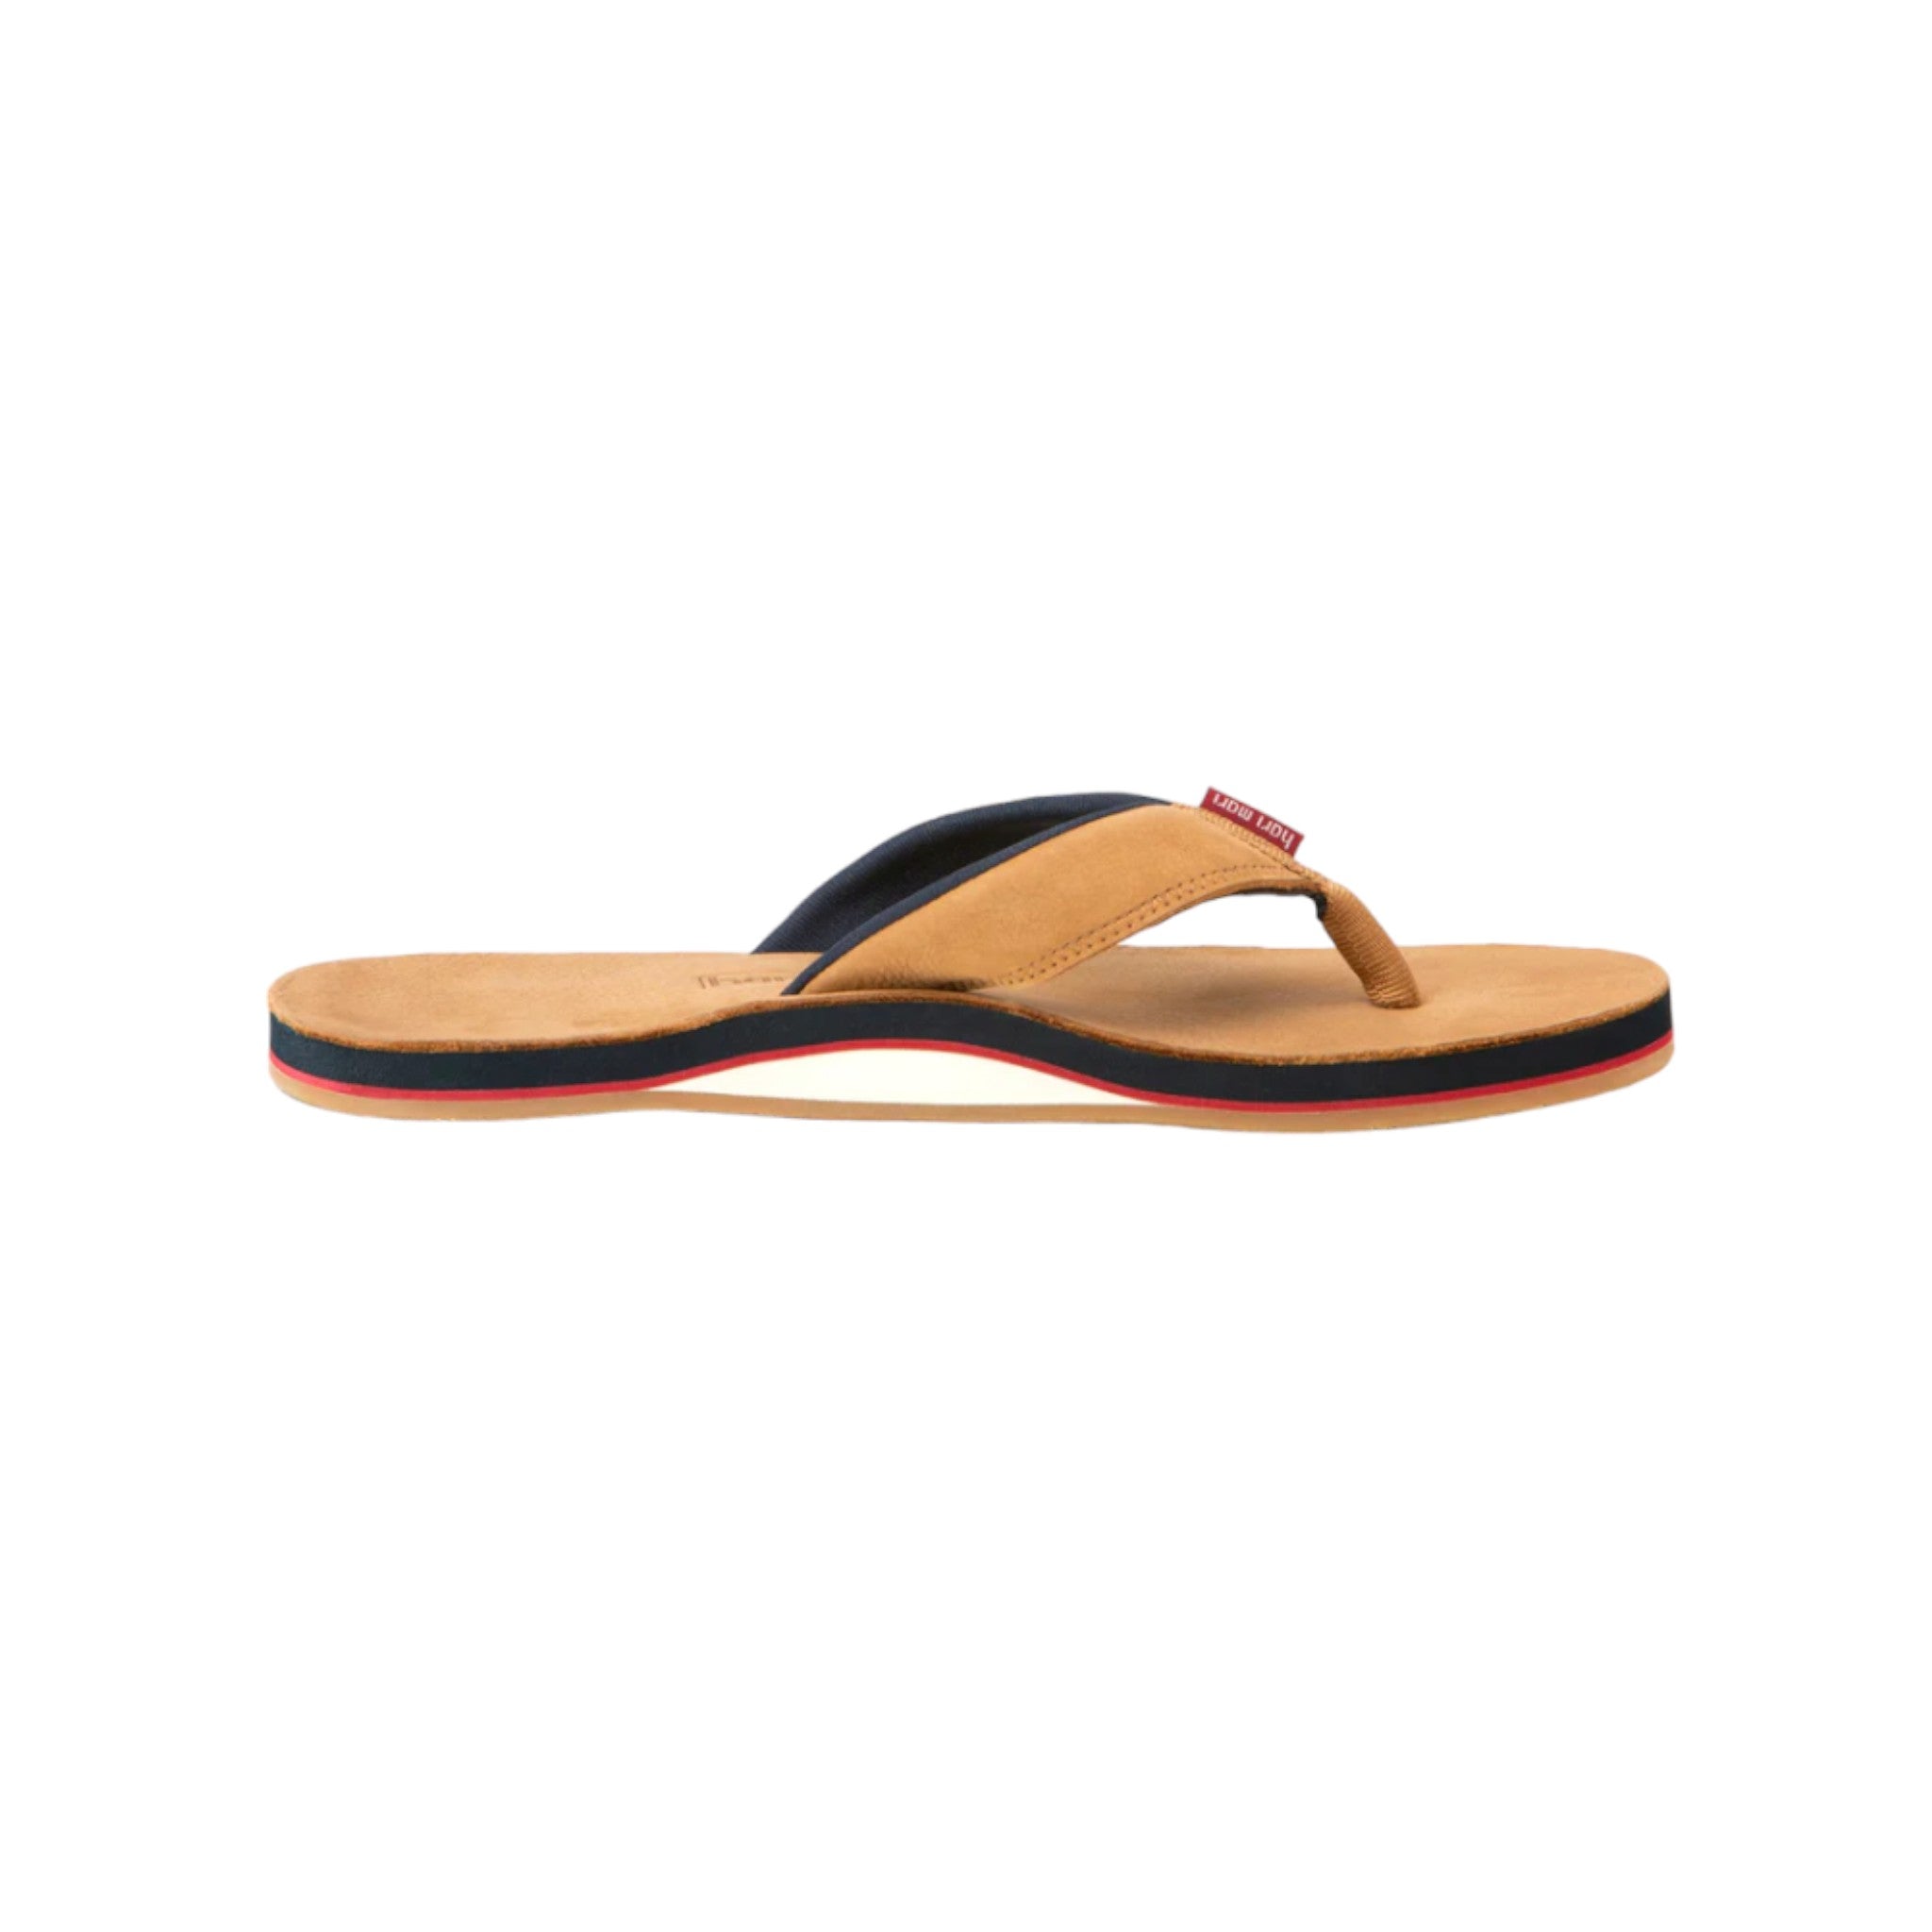 side profile of a tan flip flop with navy, red, and white accents